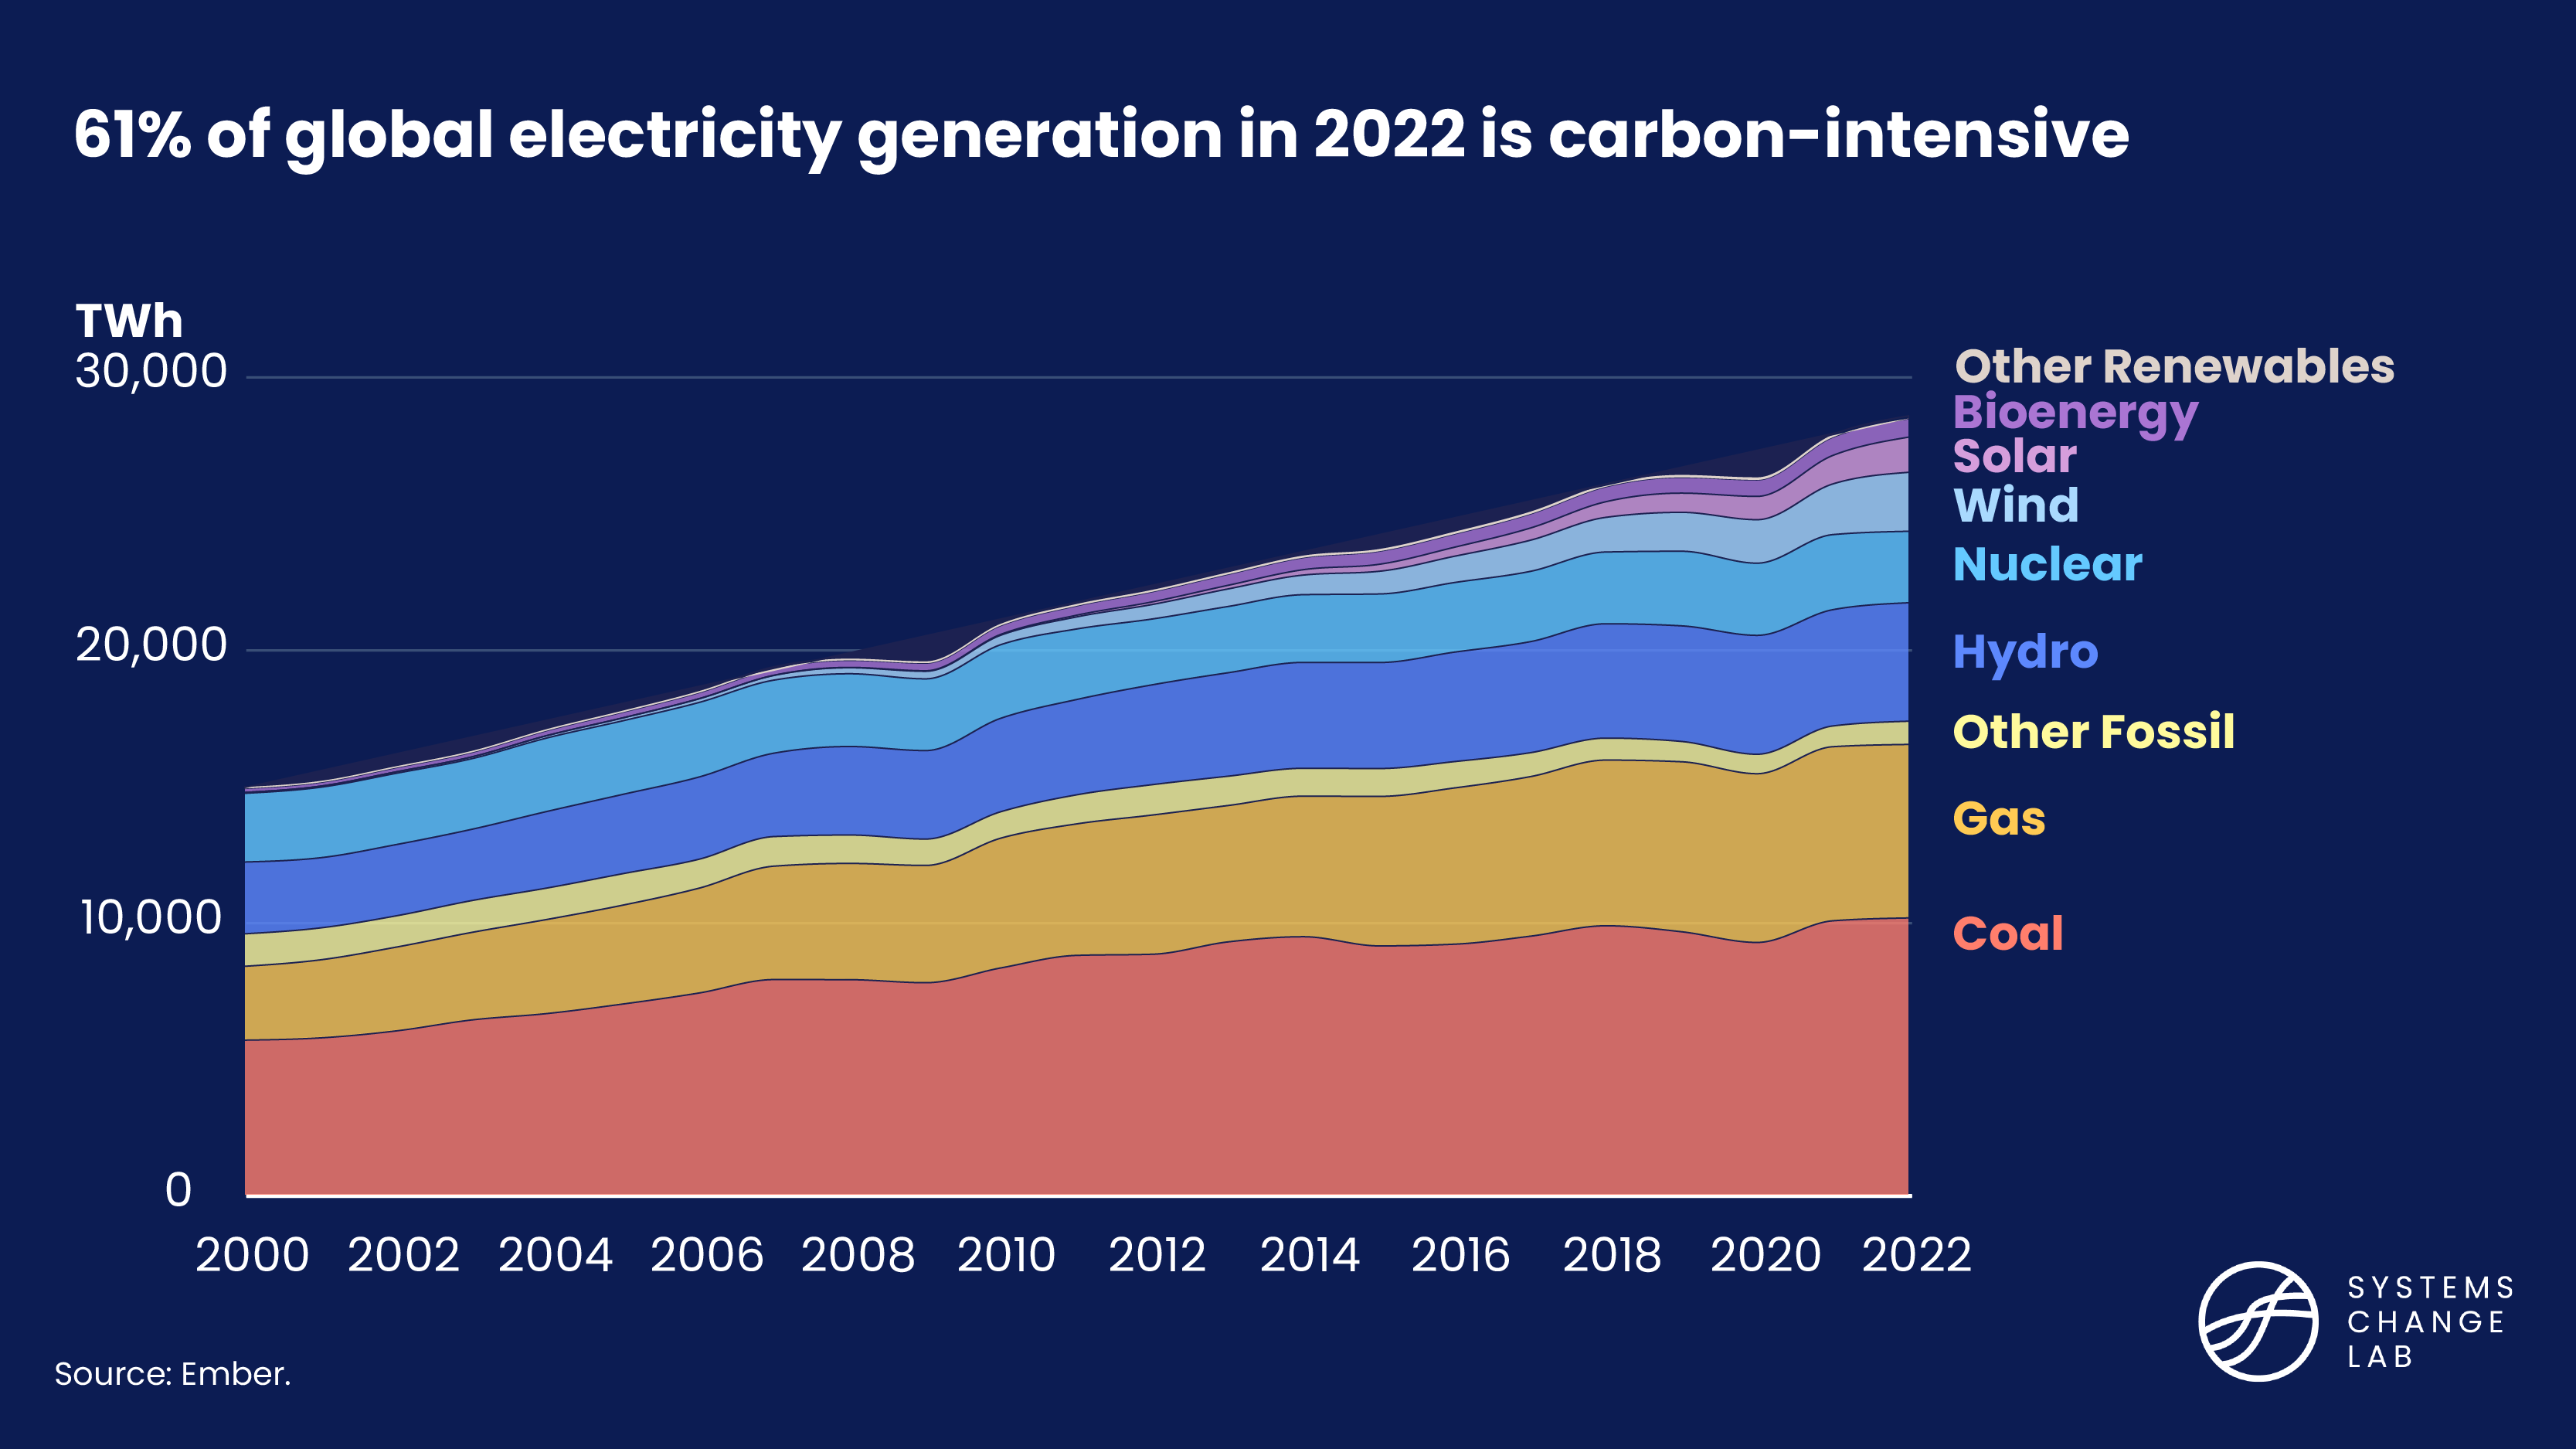 Breakdown of electricity generation by source, 61% of global electricity generation in 2022 is carbon-intensive